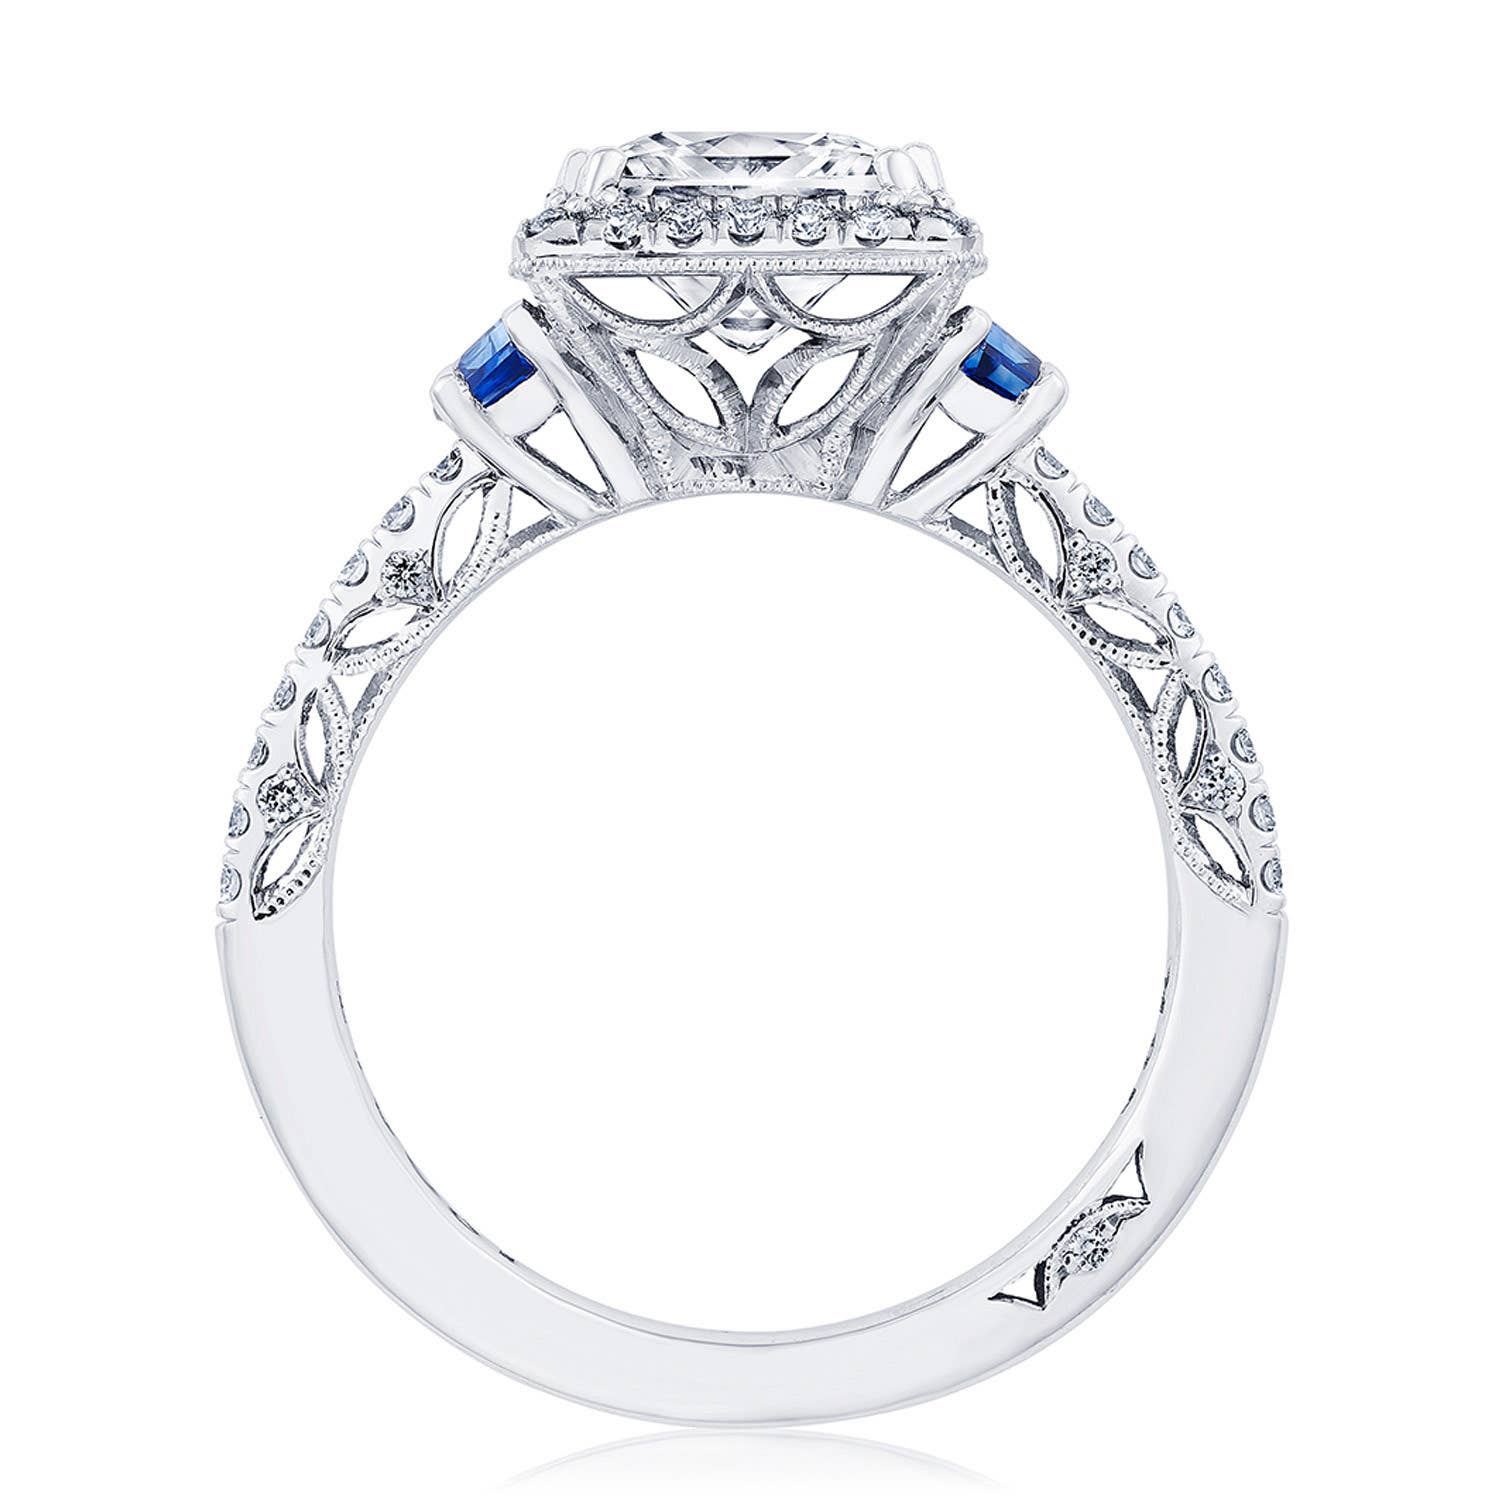 Princess 3-Stone Engagement Ring with Blue Sapphire